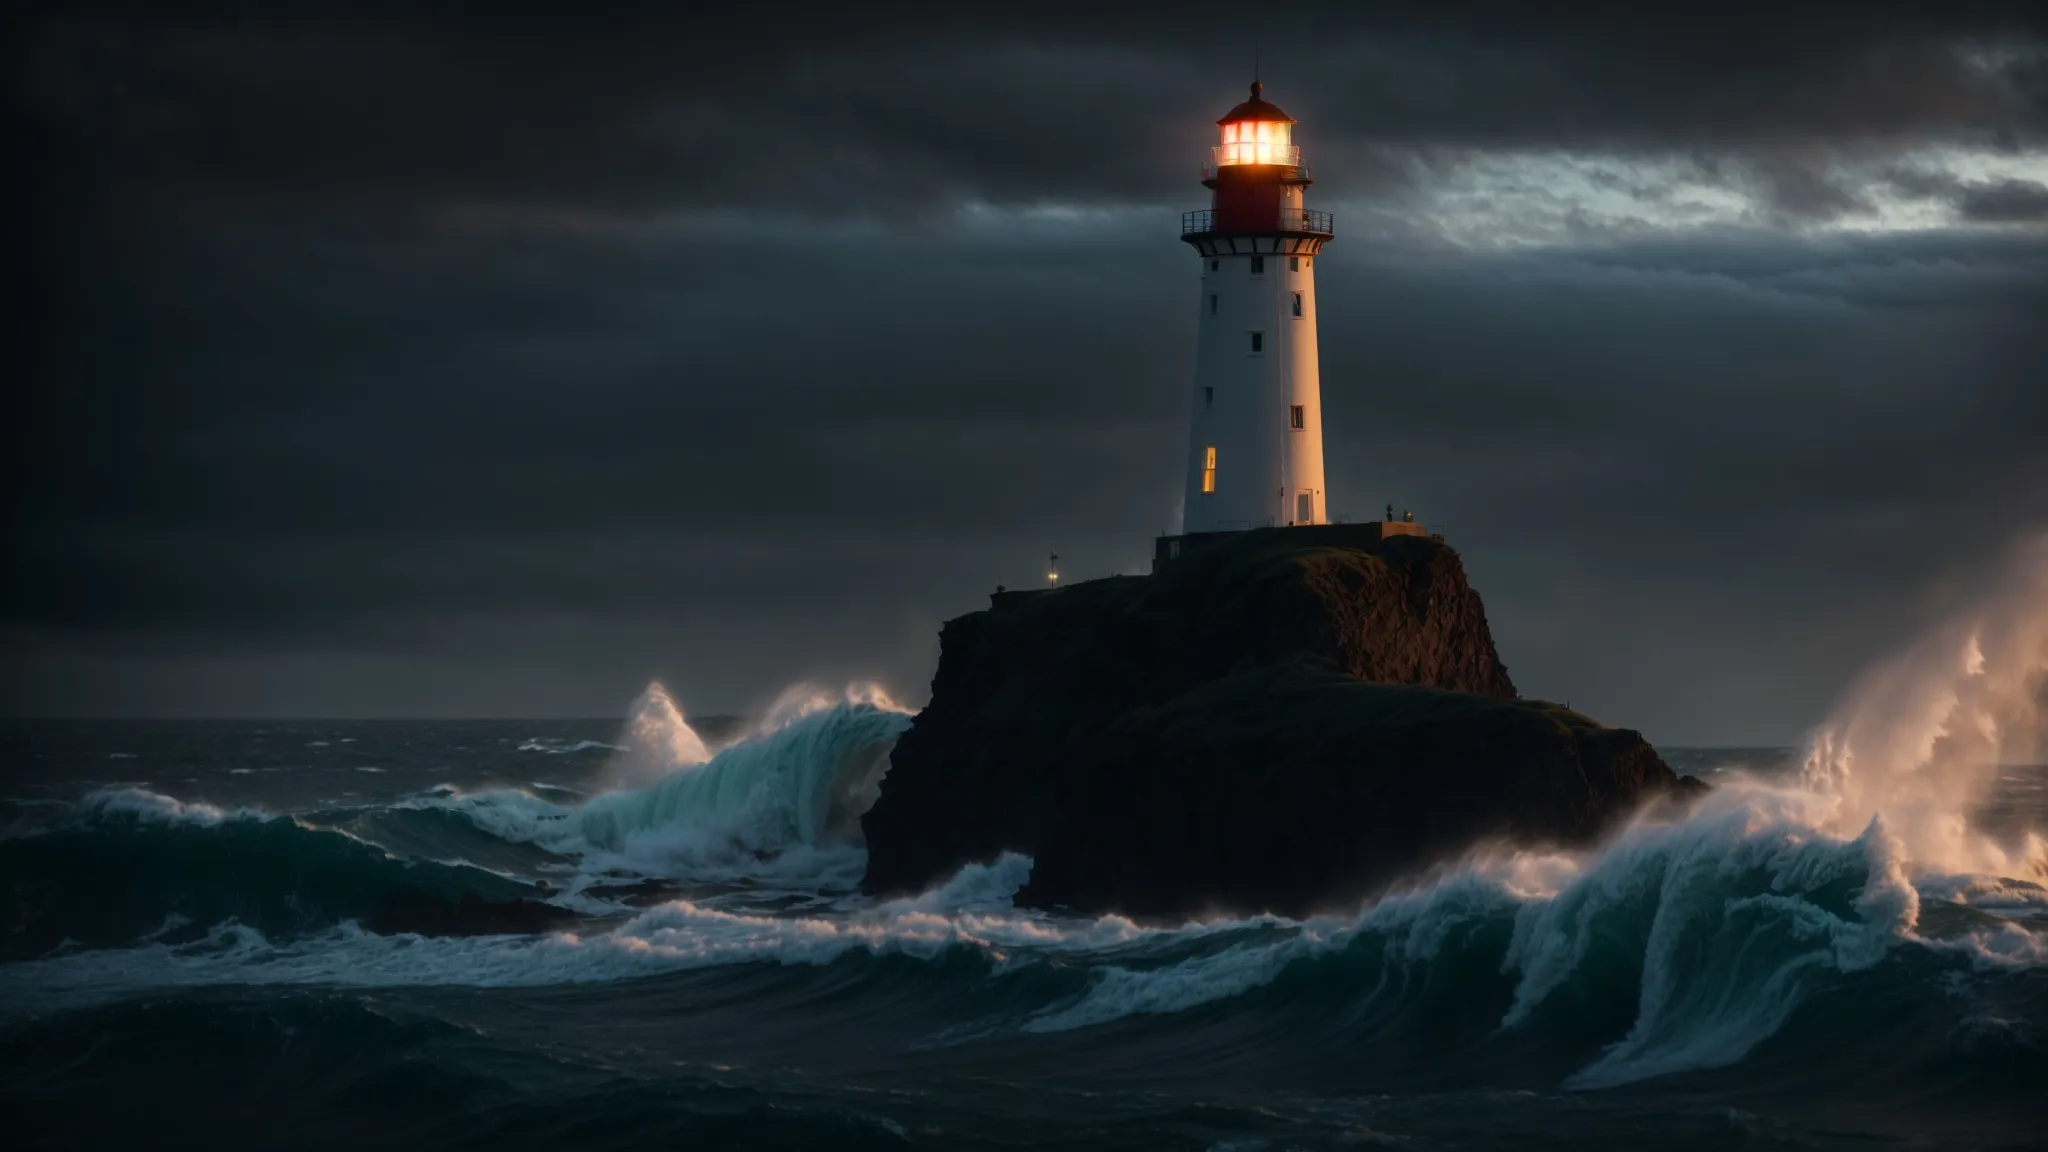 a lighthouse stands tall on the coast, guiding ships through the night with its powerful beam.